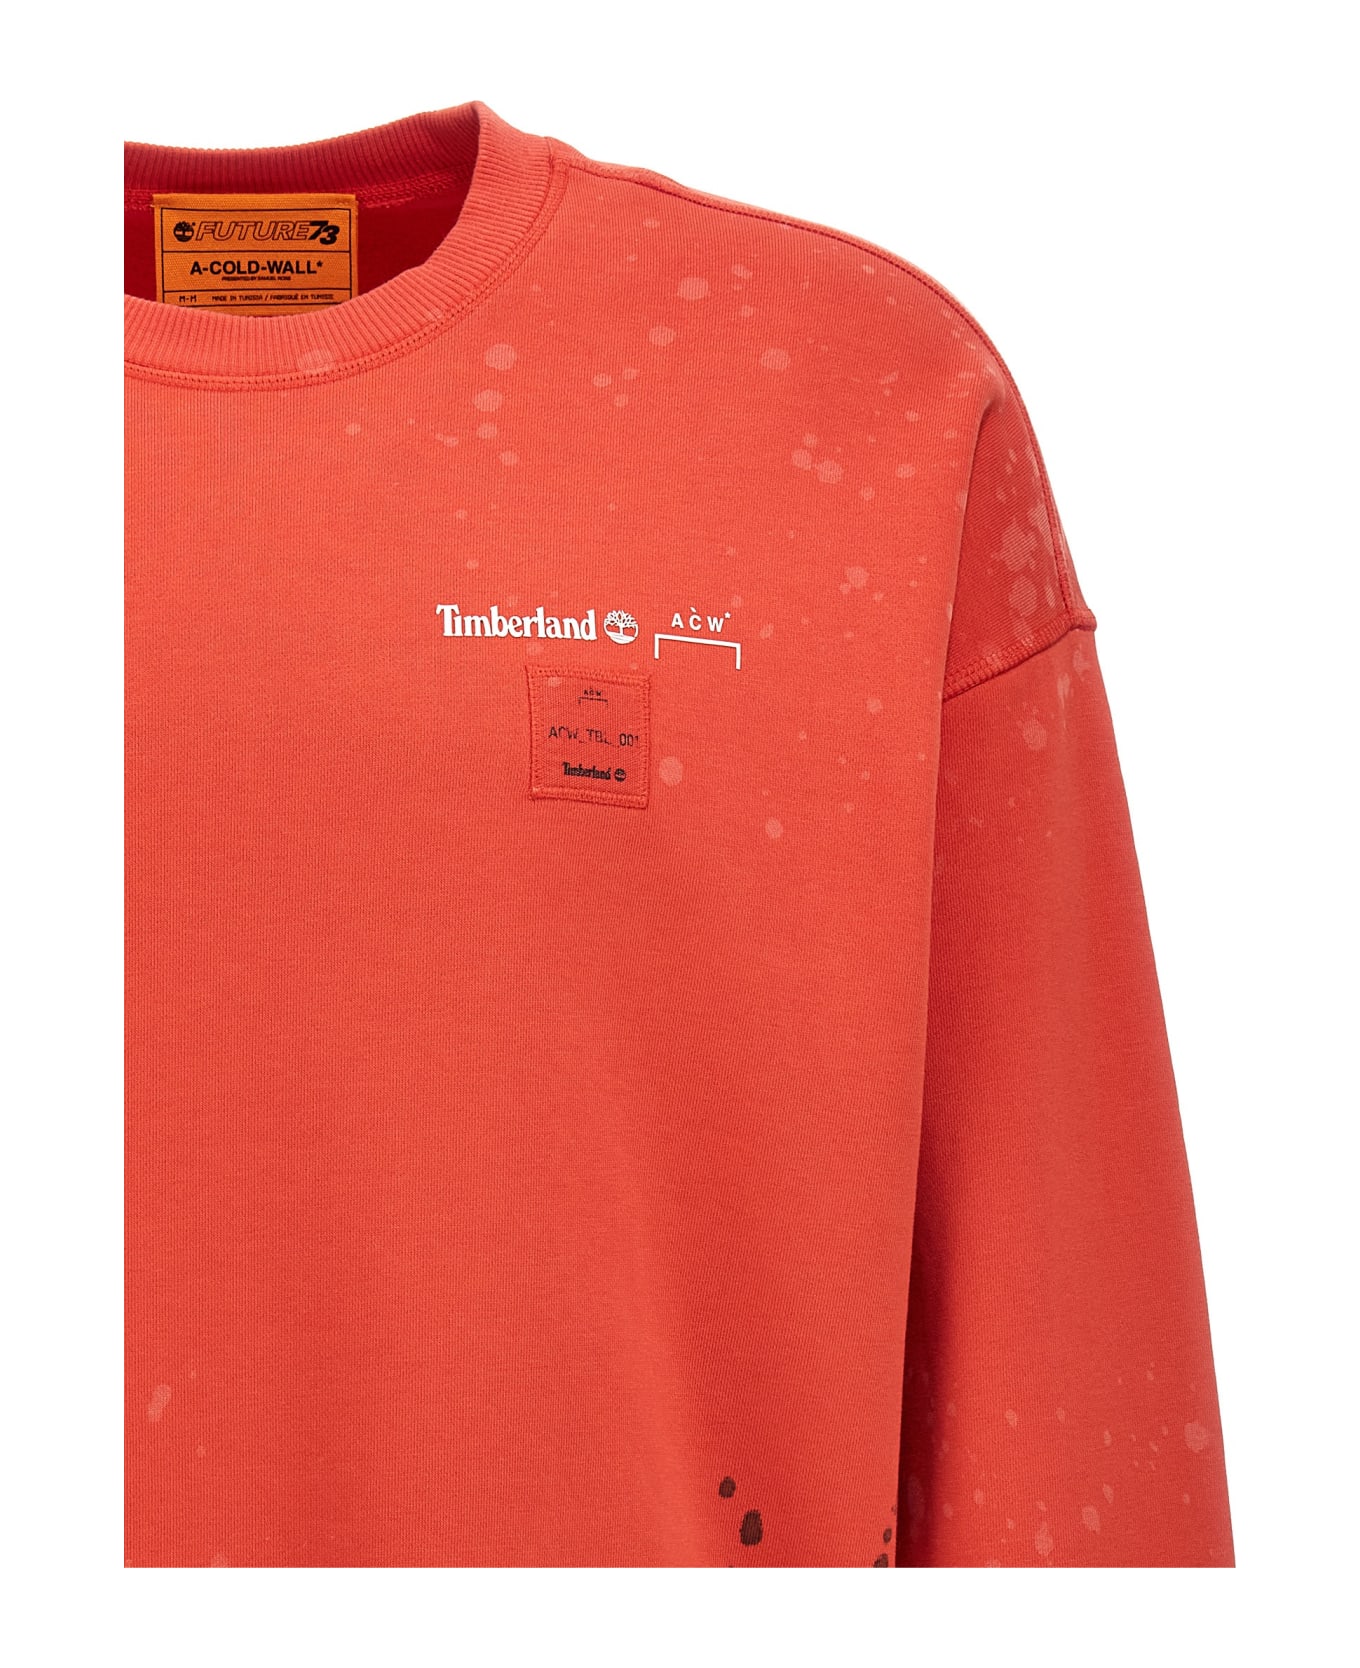 A-COLD-WALL Timberland A-cold-wall* Capsule Sweatshirt - Red